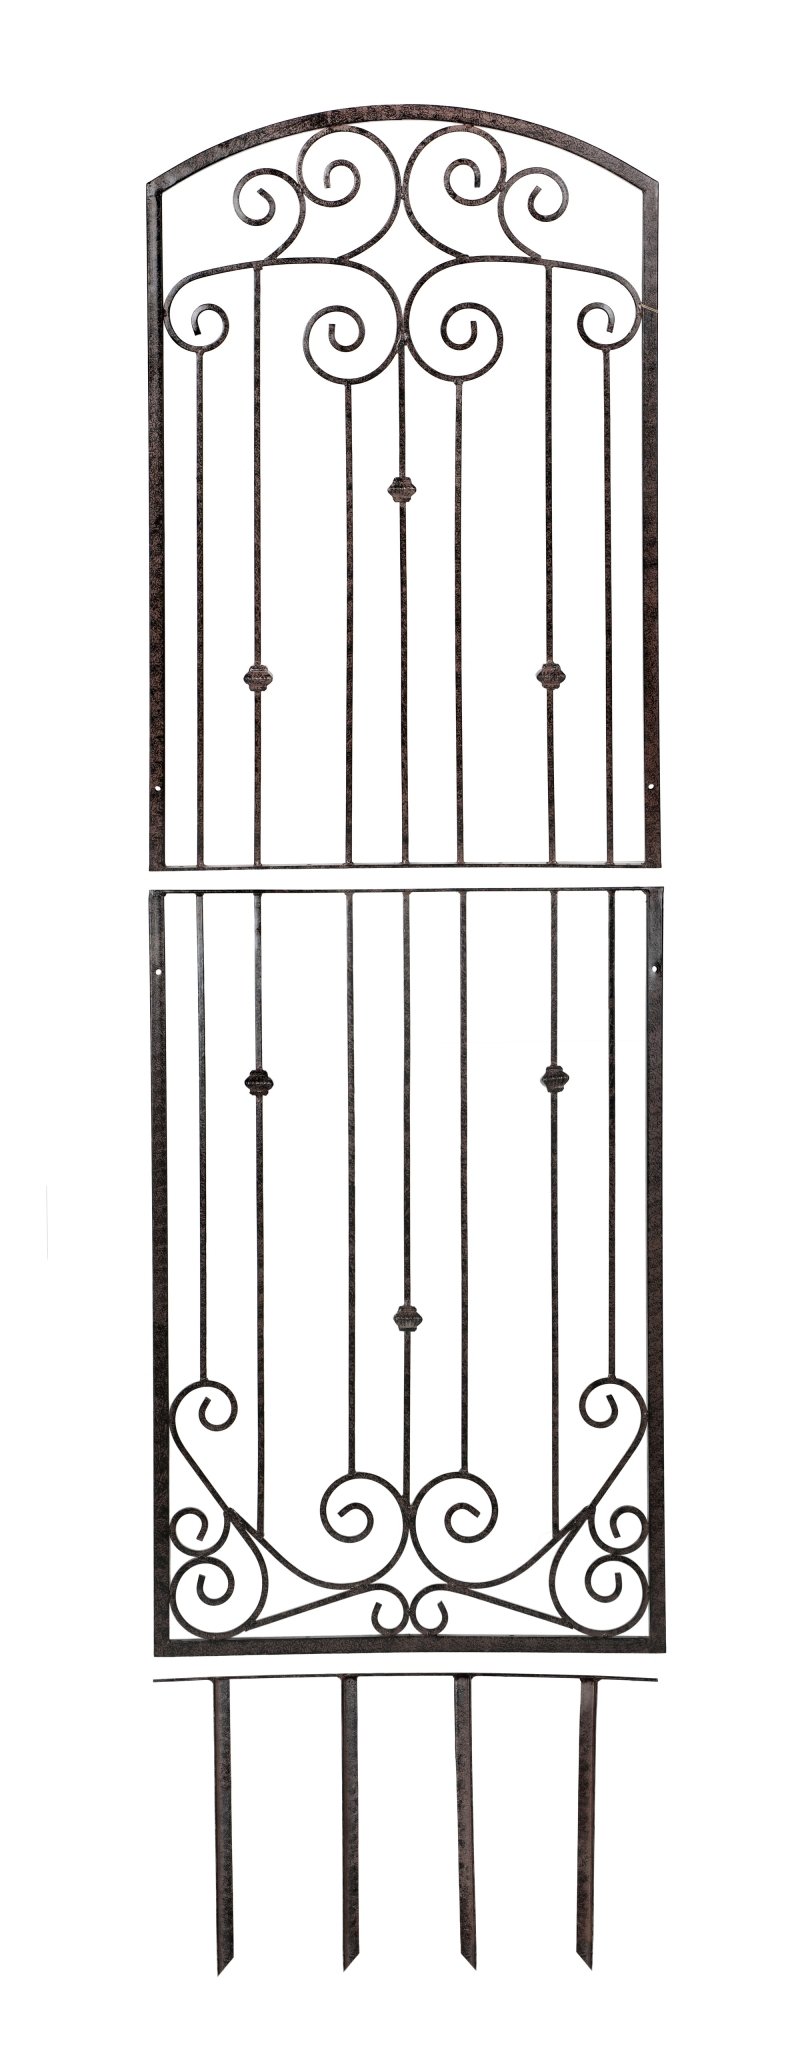 H Potter 8 Foot Wrought Iron Garden Trellis Metal Wall Screen with Wall Mounting Brackets - H Potter